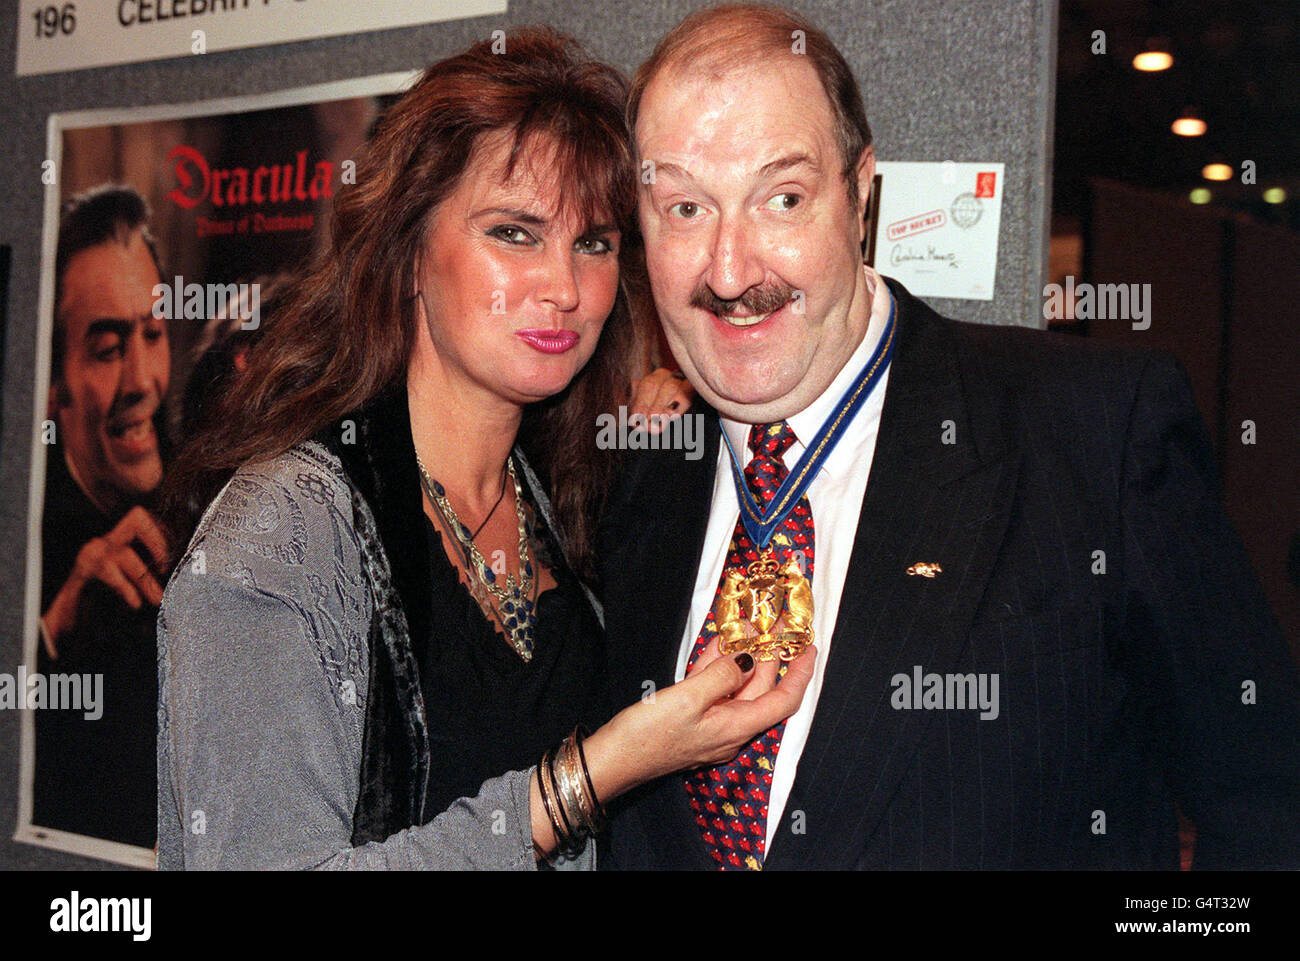 Former Bond Girl and Hammer Horror star Caroline Munro with Gorden Kaye the current King Rat of the Grand Order of the Water Rats, a showbiz charity, at the opening of Collect '99 at Wembley Exhibition Centre in London. (Gordon Kaye Incorrect Spelling) * Collect '99 is an exhibition with items ranging from modesl to stamps, to autographs and TV and Film memorabilia. Stock Photo